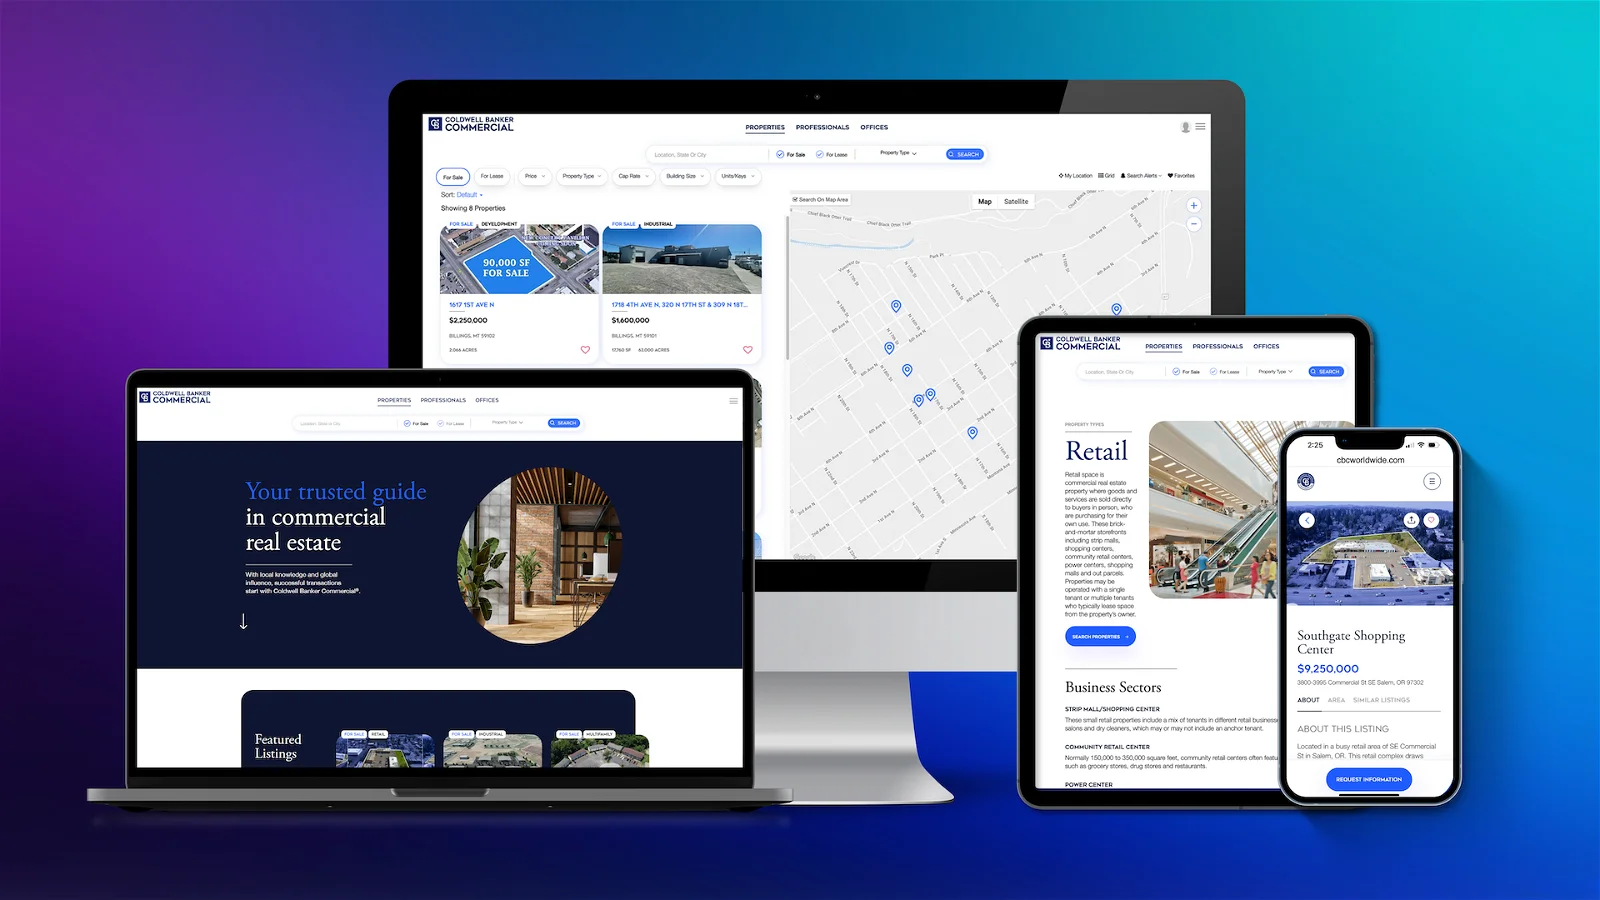 Coldwell Banker Commercial Paves the Way for the Future of Commercial Real Estate With New Website